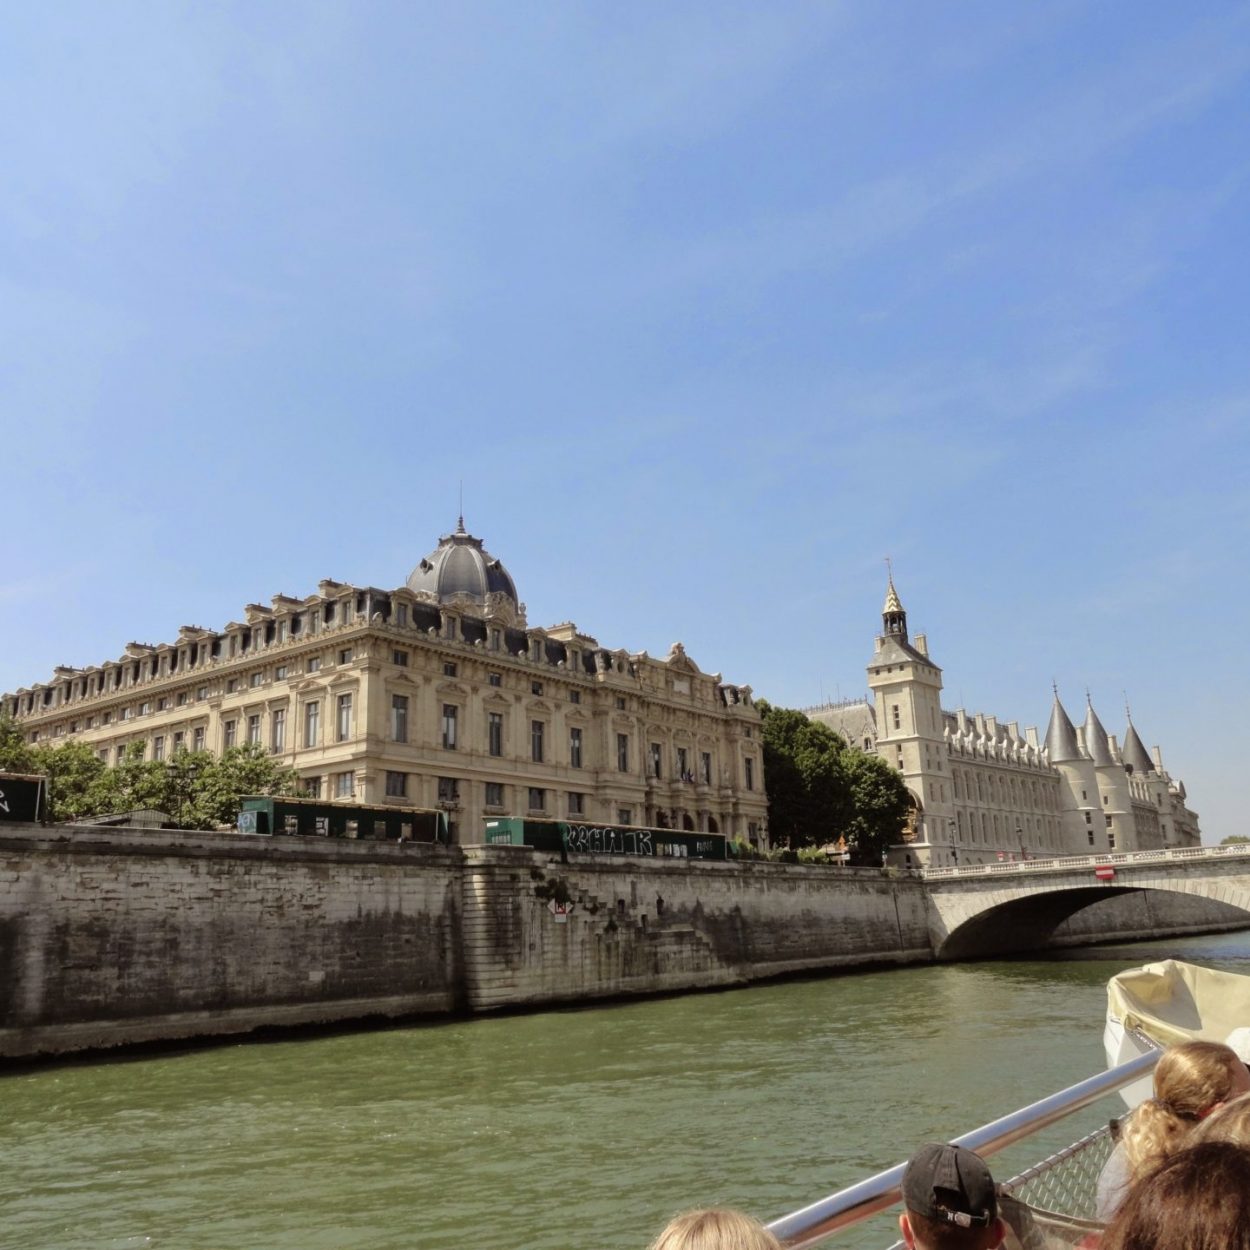 One of the old monuments of the city seen from the cruise on the River Seine.